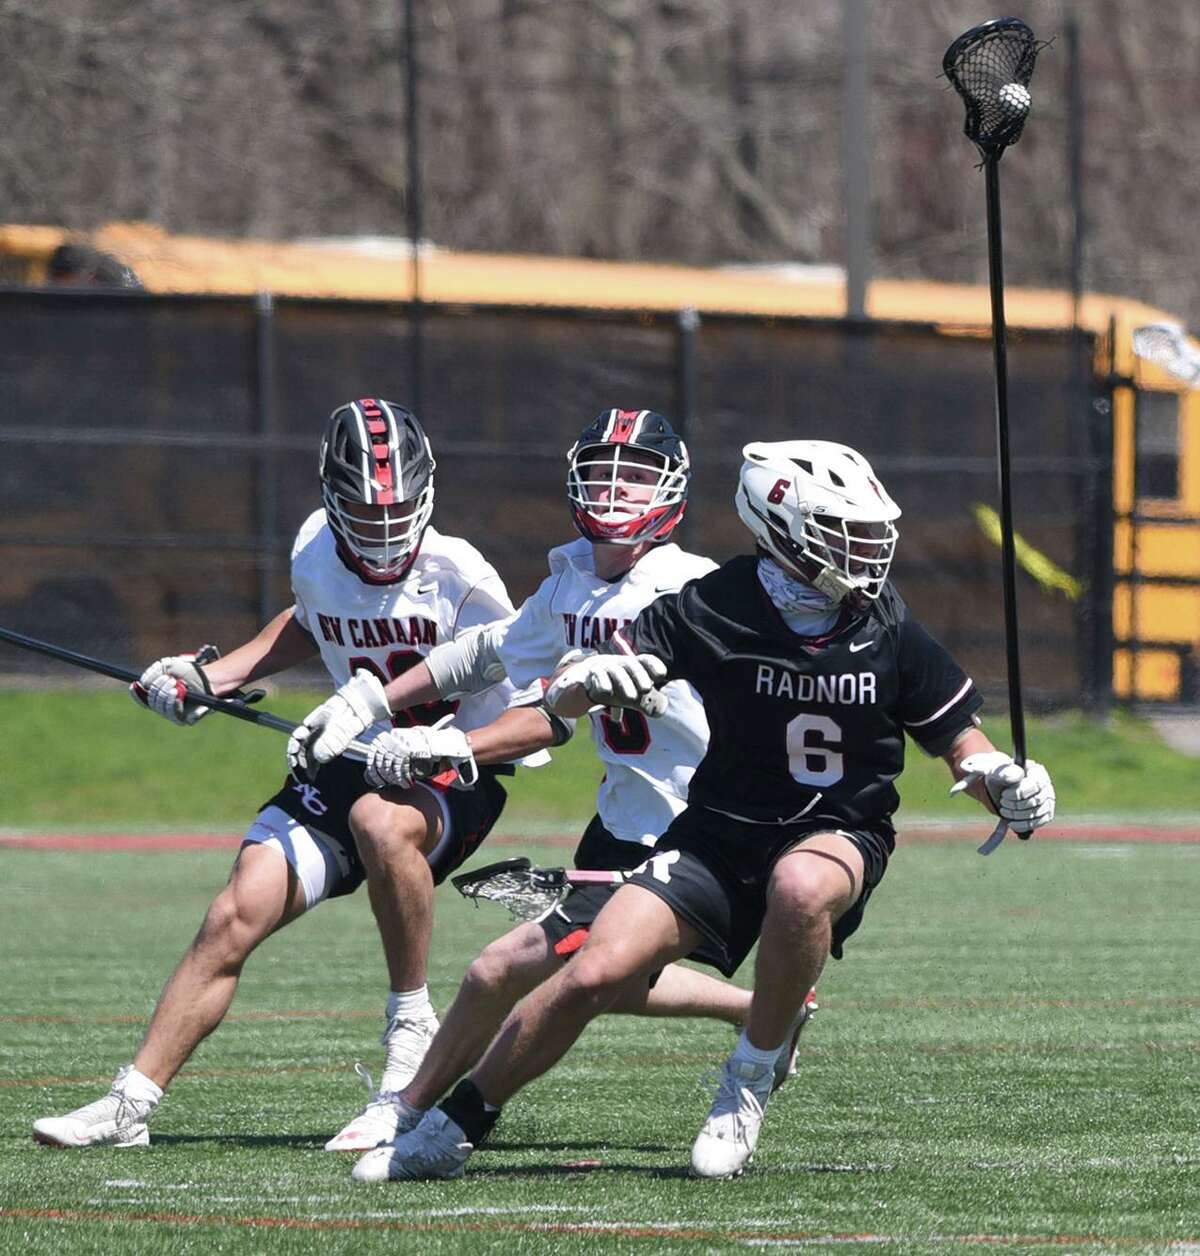 Radnor's Luciano Chadha (6) controls the ball in front of New Canaan's William Hayes (48) and John Totaro (15) during a boys lacrosse game in New Canaan on Tuesday, April 12, 2022.